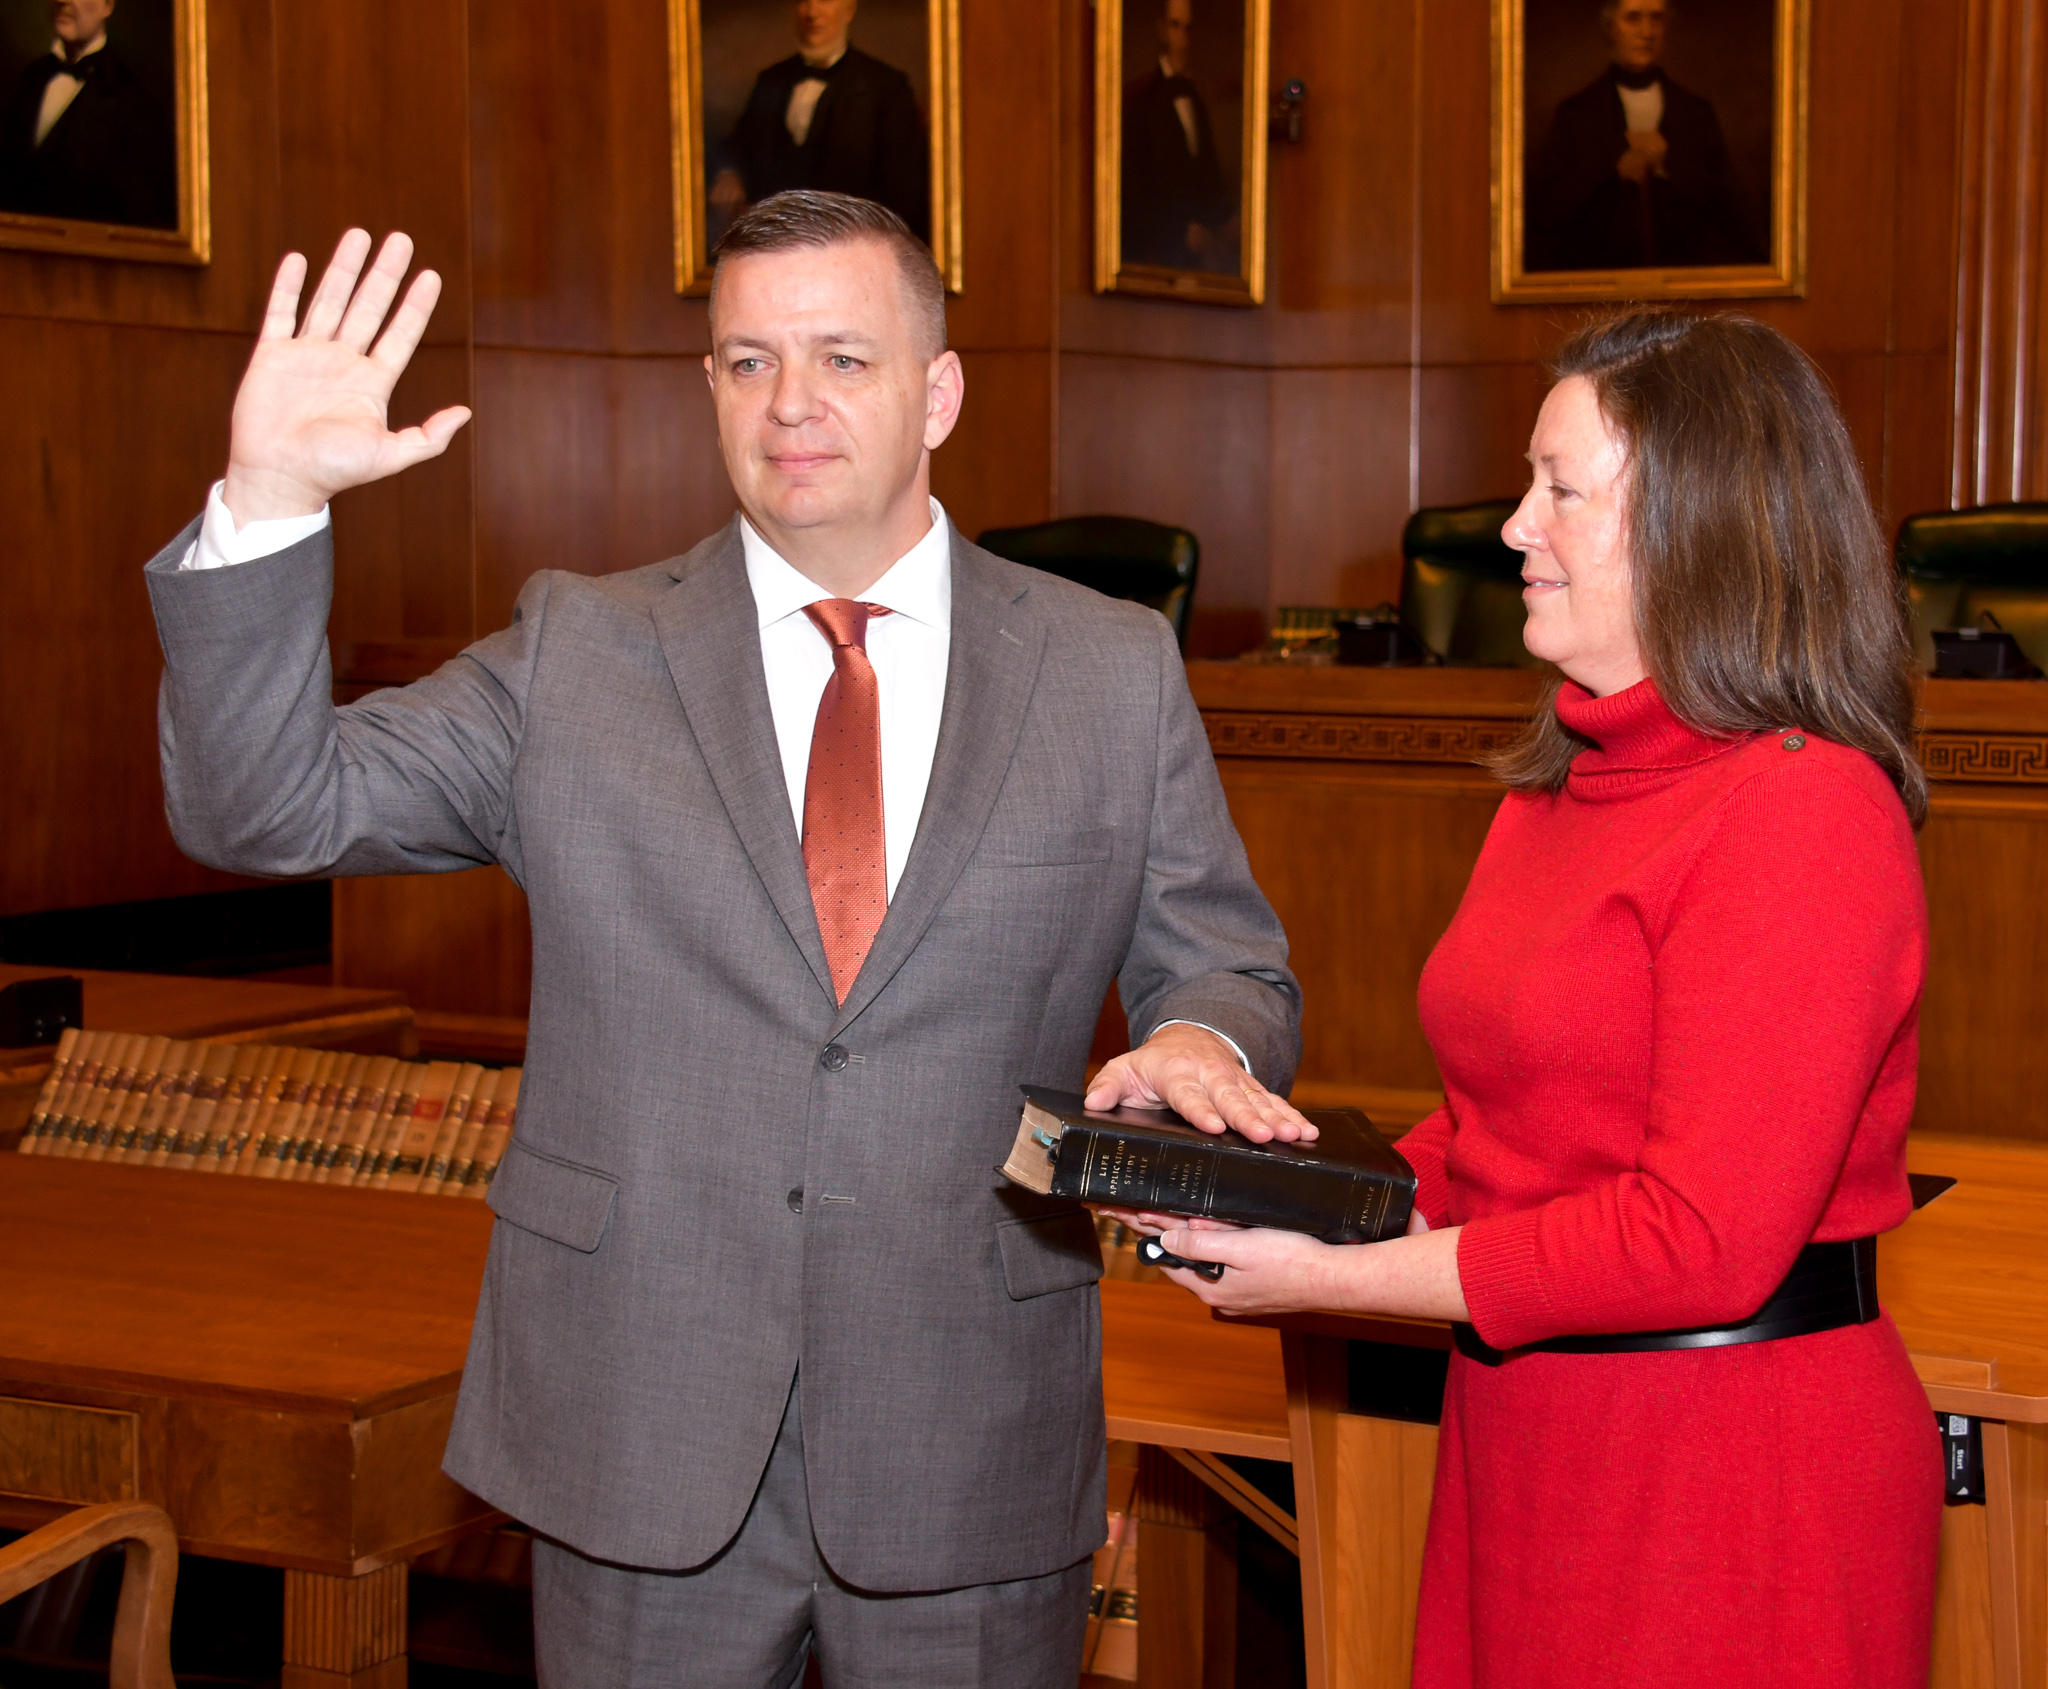 Justice Phil Berger Jr. swearing-in ceremony